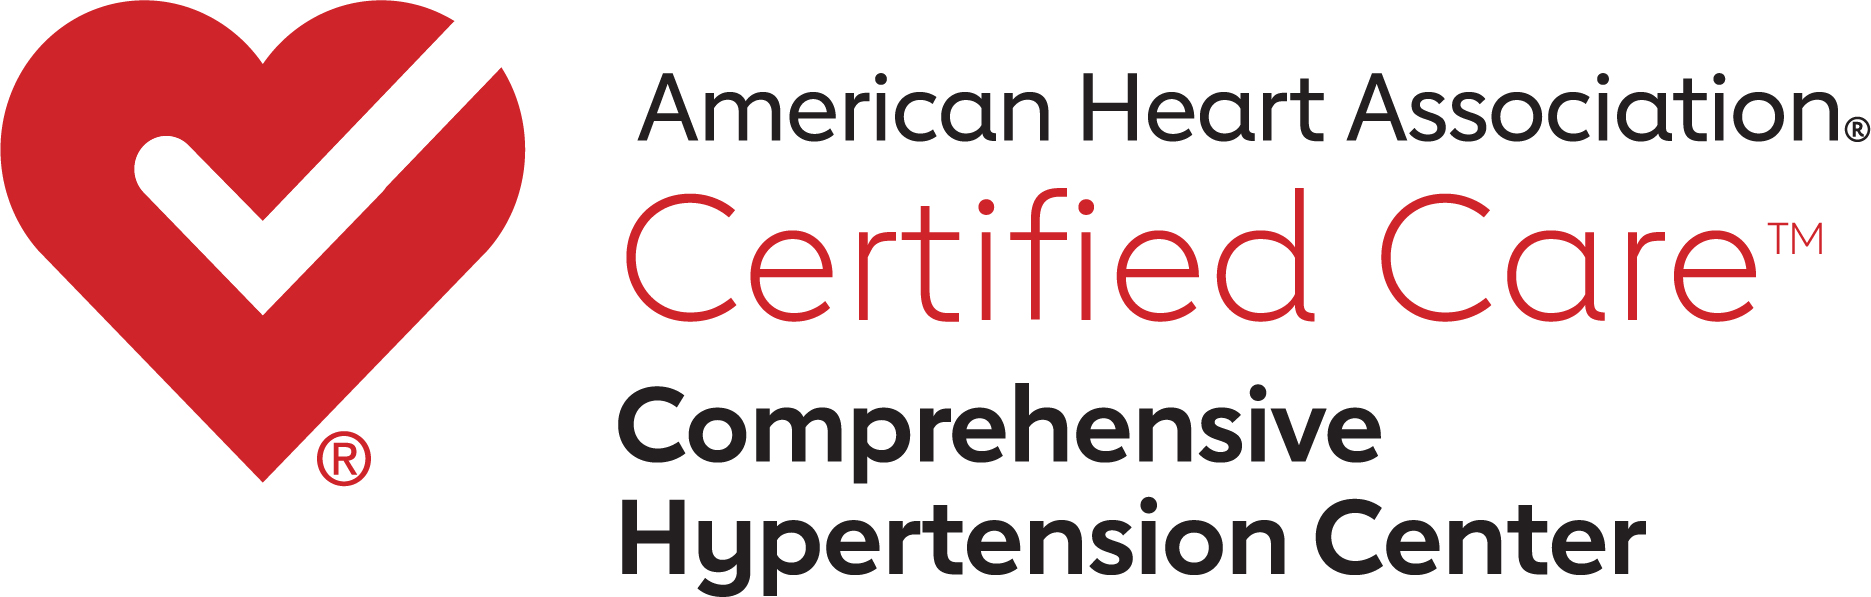 Cleveland Clinic is recognized as a Comprehensive Hypertension Center by the American Heart Association